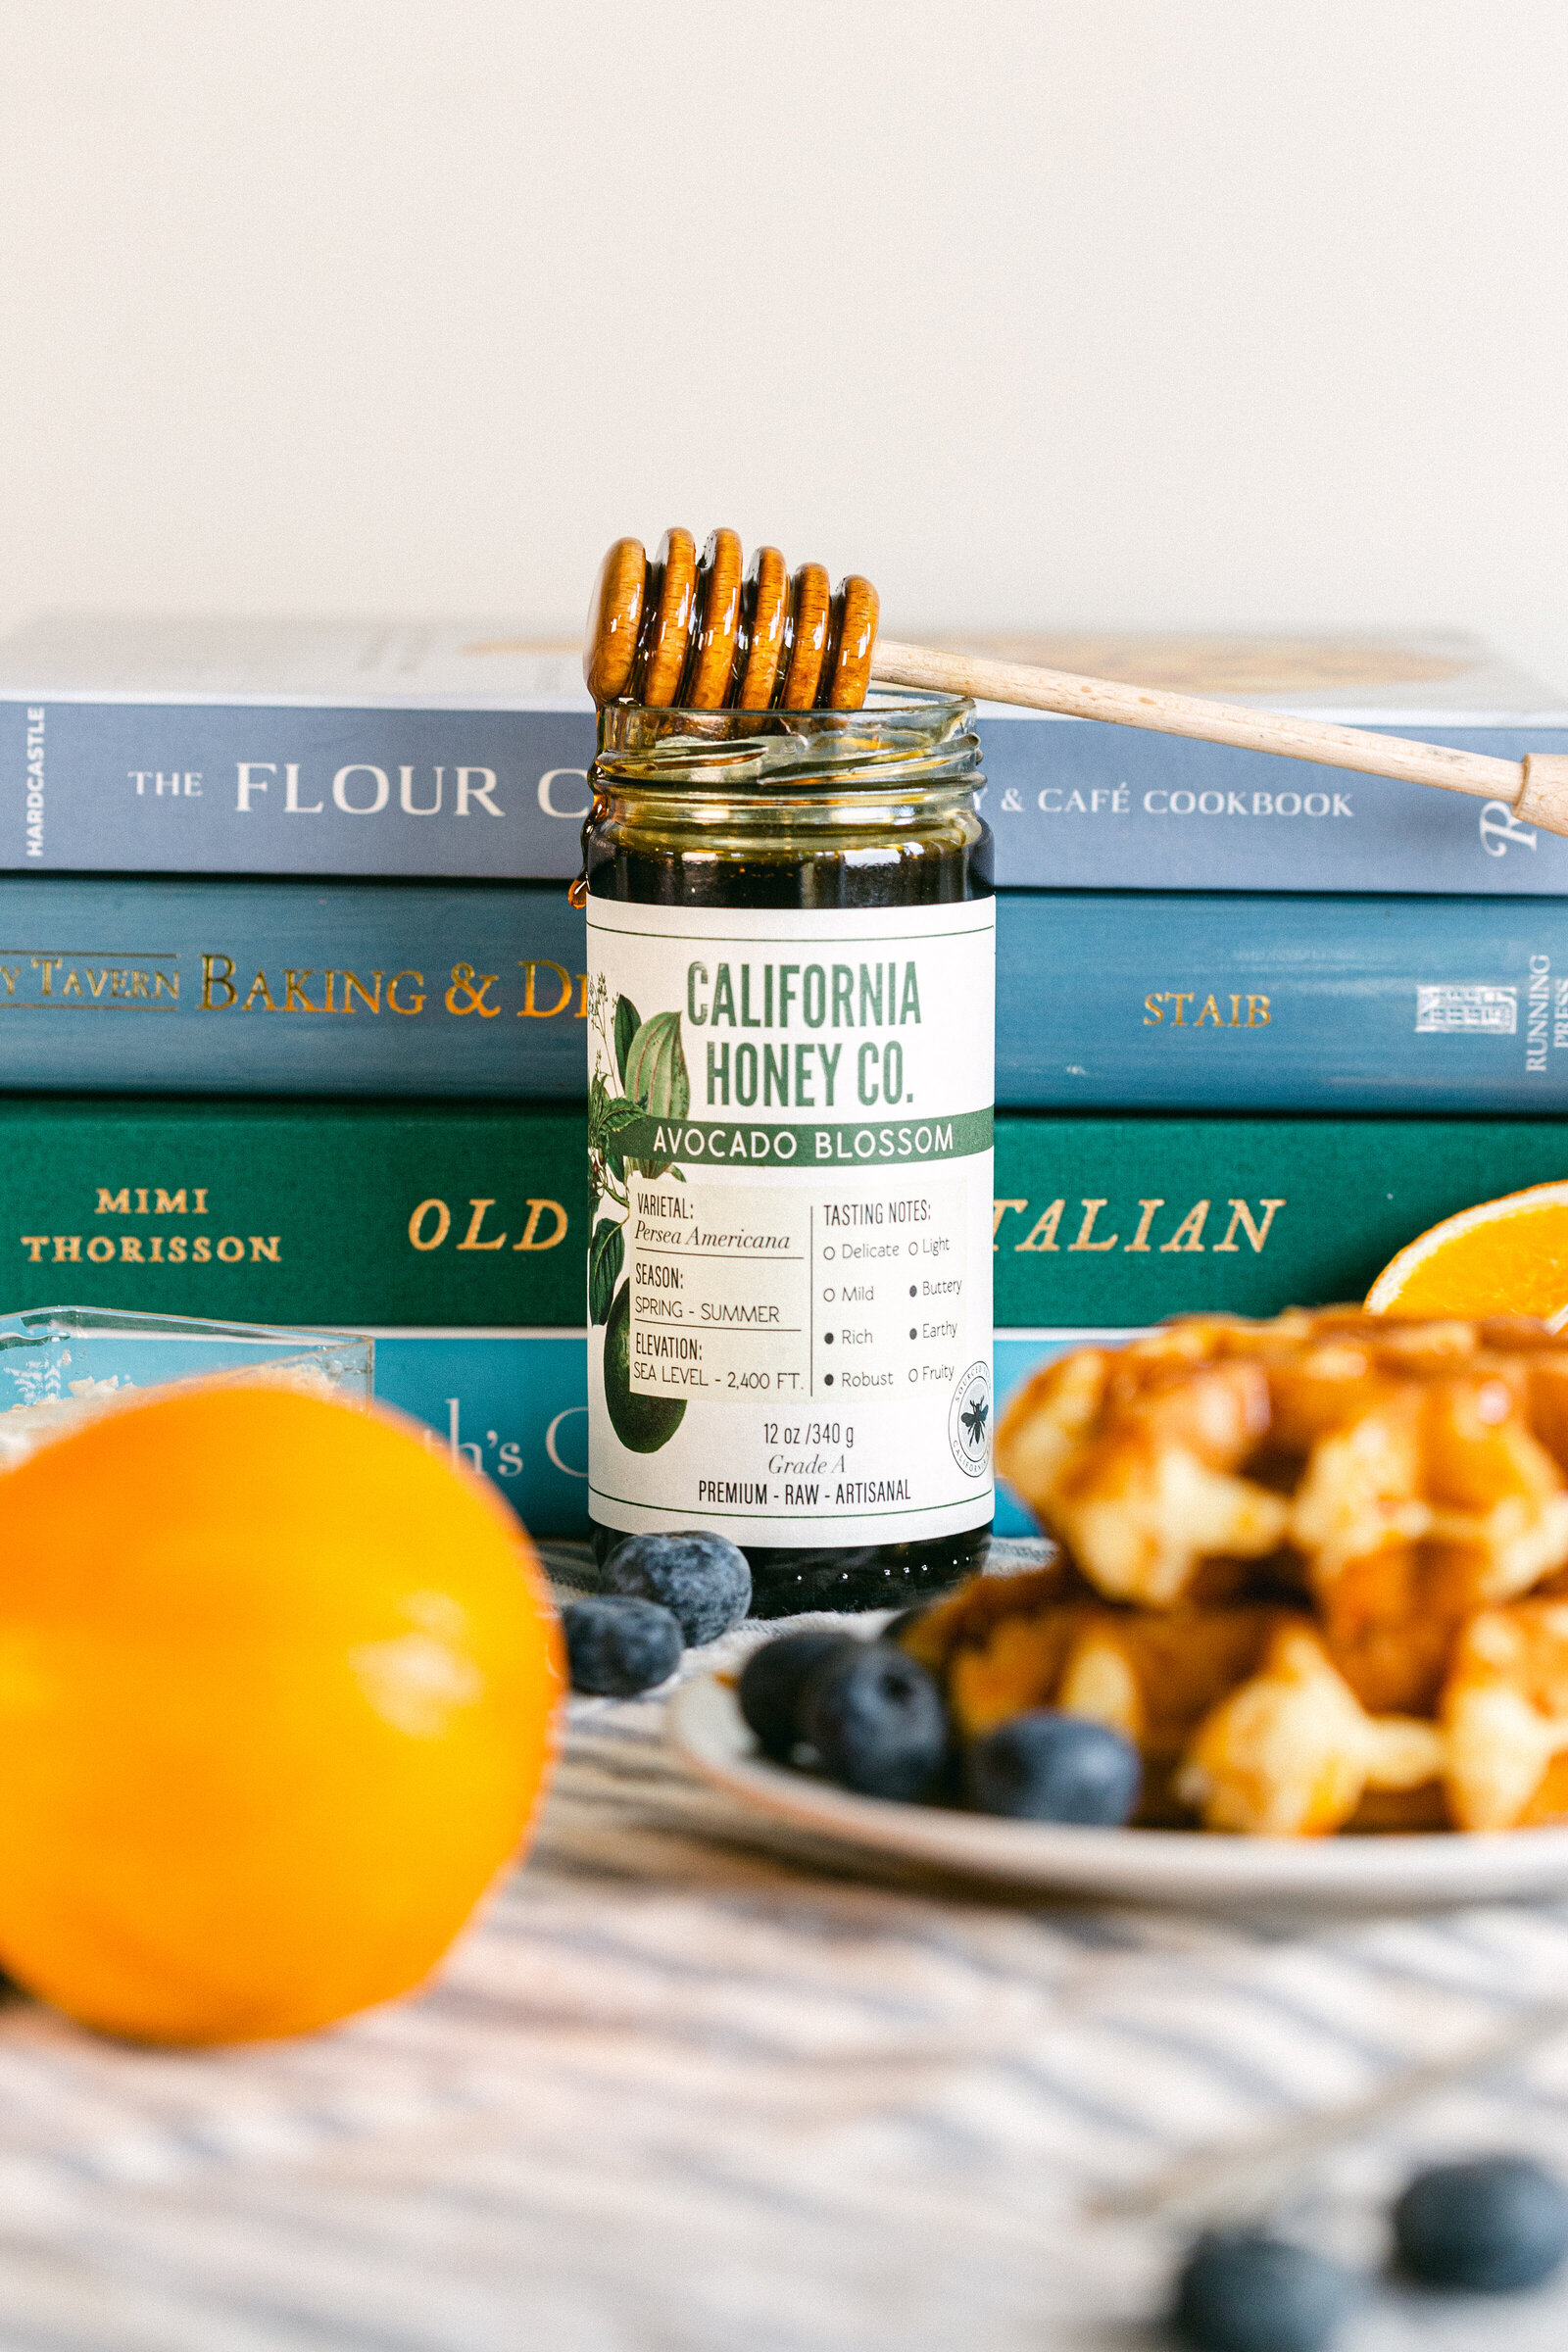 Chelsea Loren branding product photographer styled food photography with oranges, cookbooks, waffles for California Honey Co in San Diego